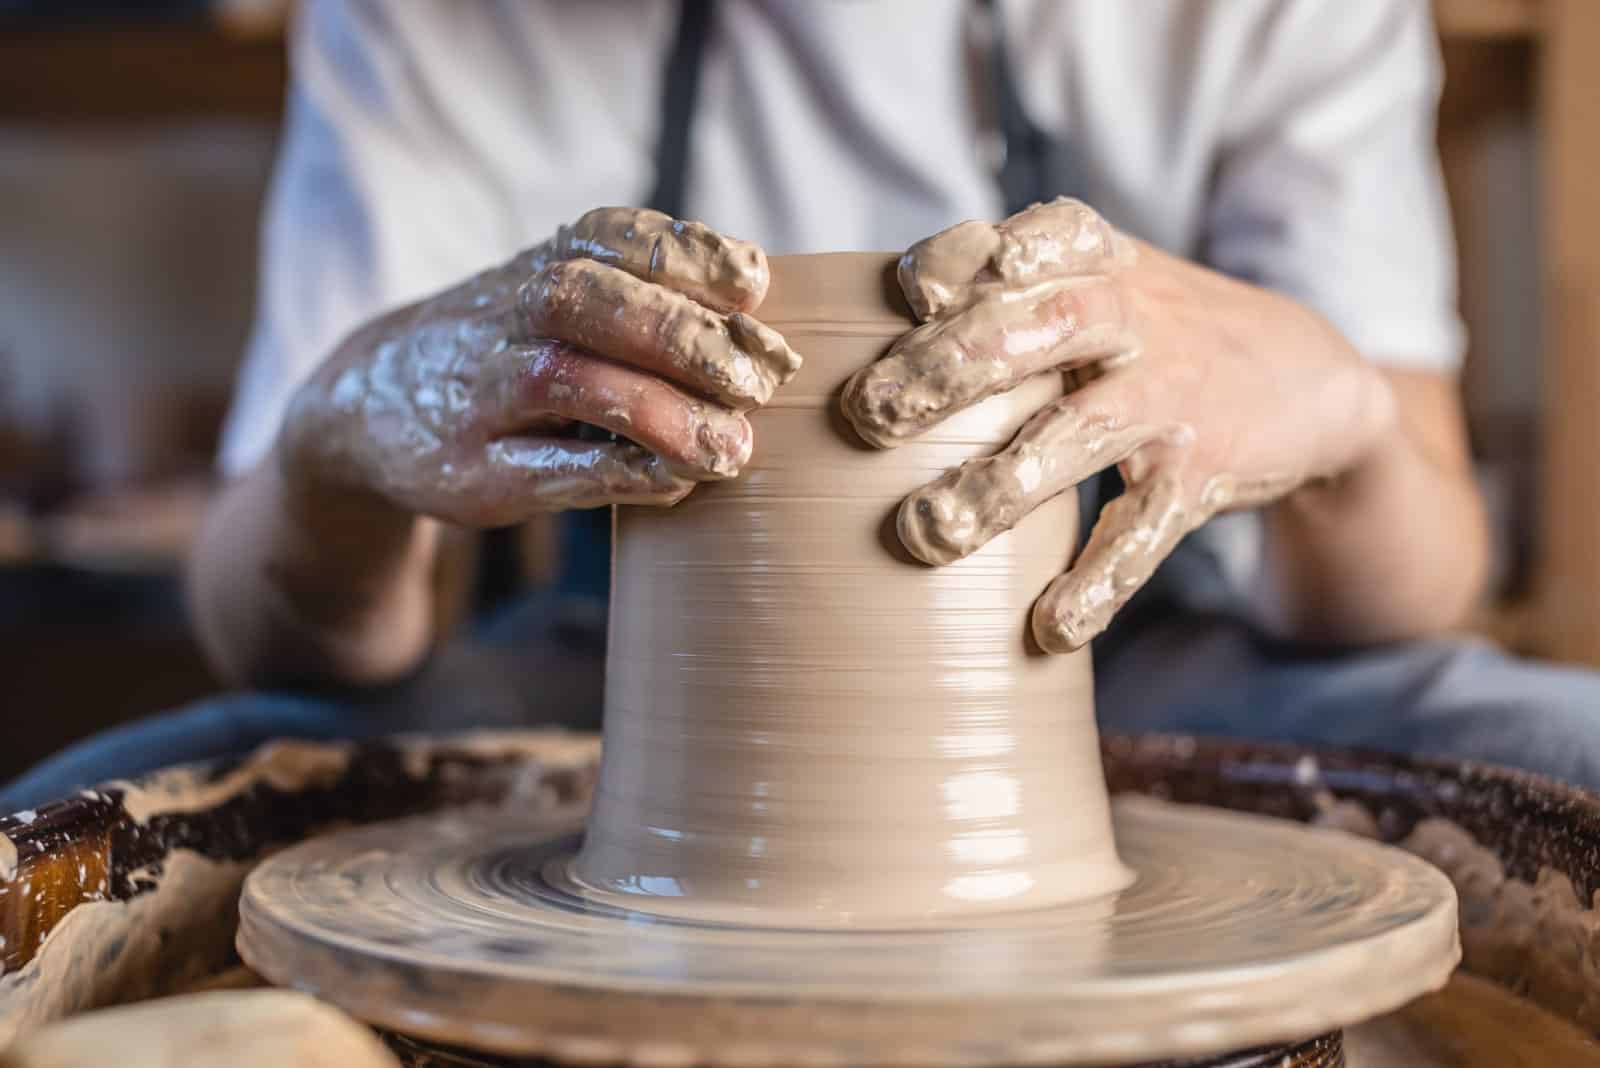 Image Credit: Shutterstock / Artem Oleshko <p>Handicrafts like weaving, pottery, and carving are not only artistic expressions but also ways to maintain dexterity and mental agility. Learning these crafts can connect us with history and enhance practical skills.</p>